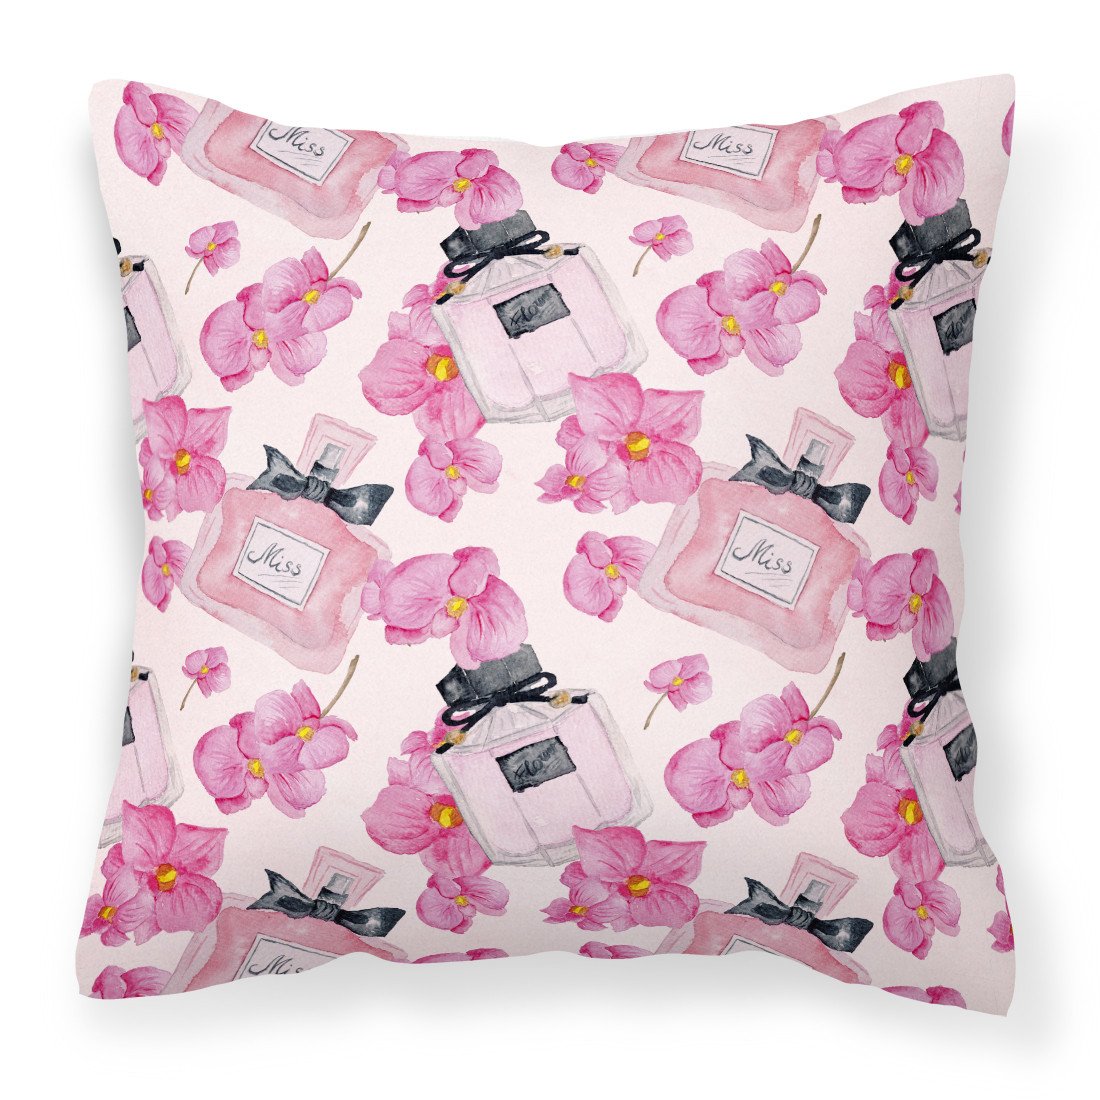 Watercolor Pink Flowers and Perfume Fabric Decorative Pillow BB7510PW1818 by Caroline's Treasures